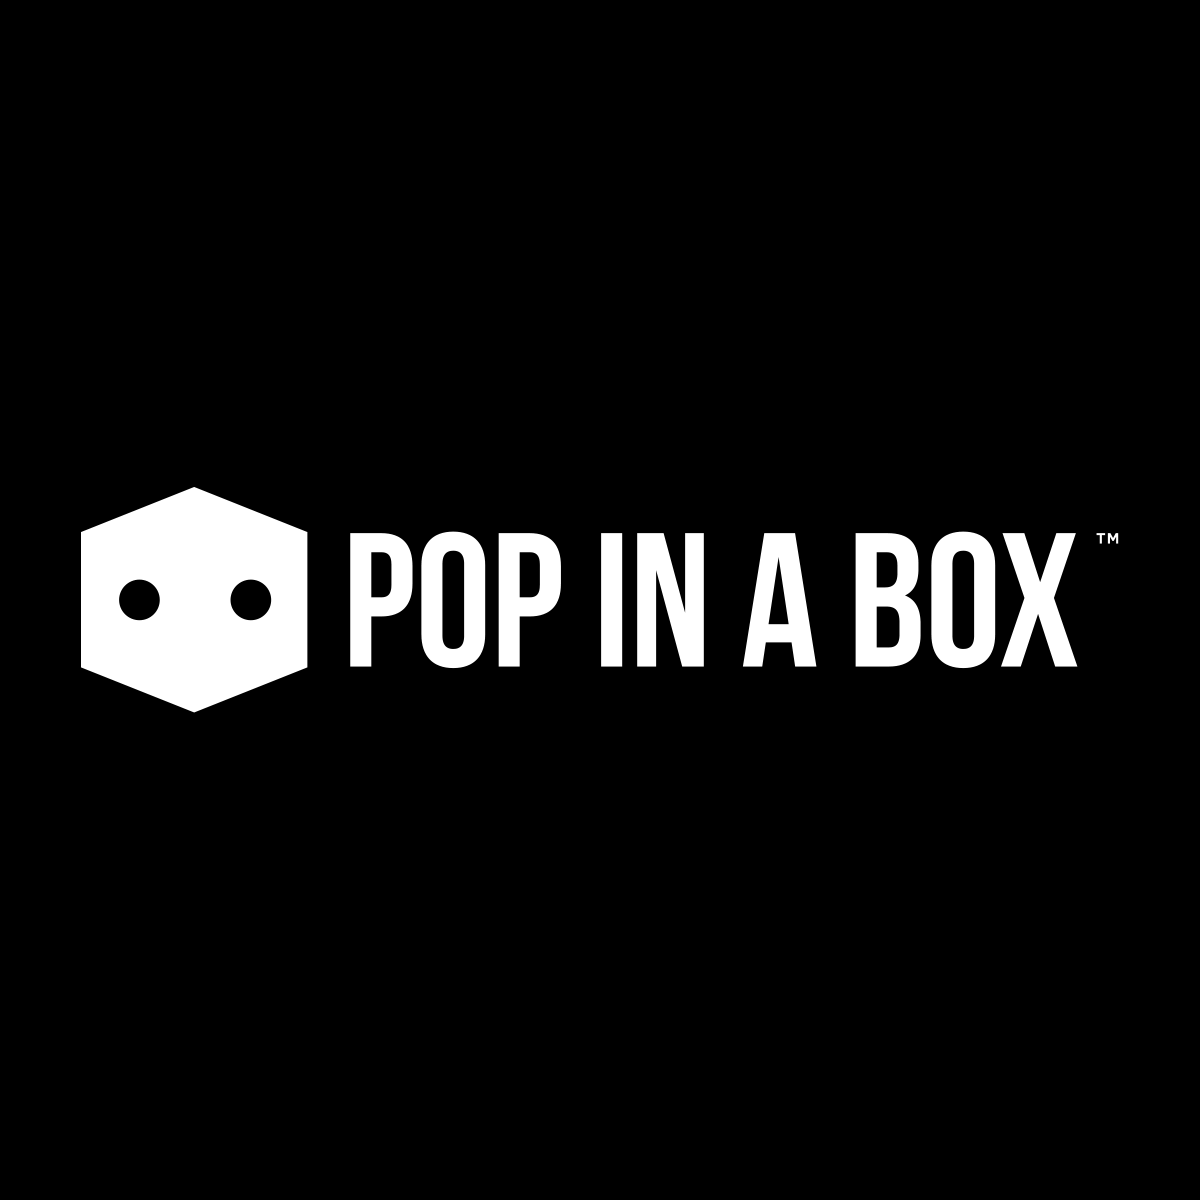 Get More Coupon Codes And Deals At Pop In A Box UK